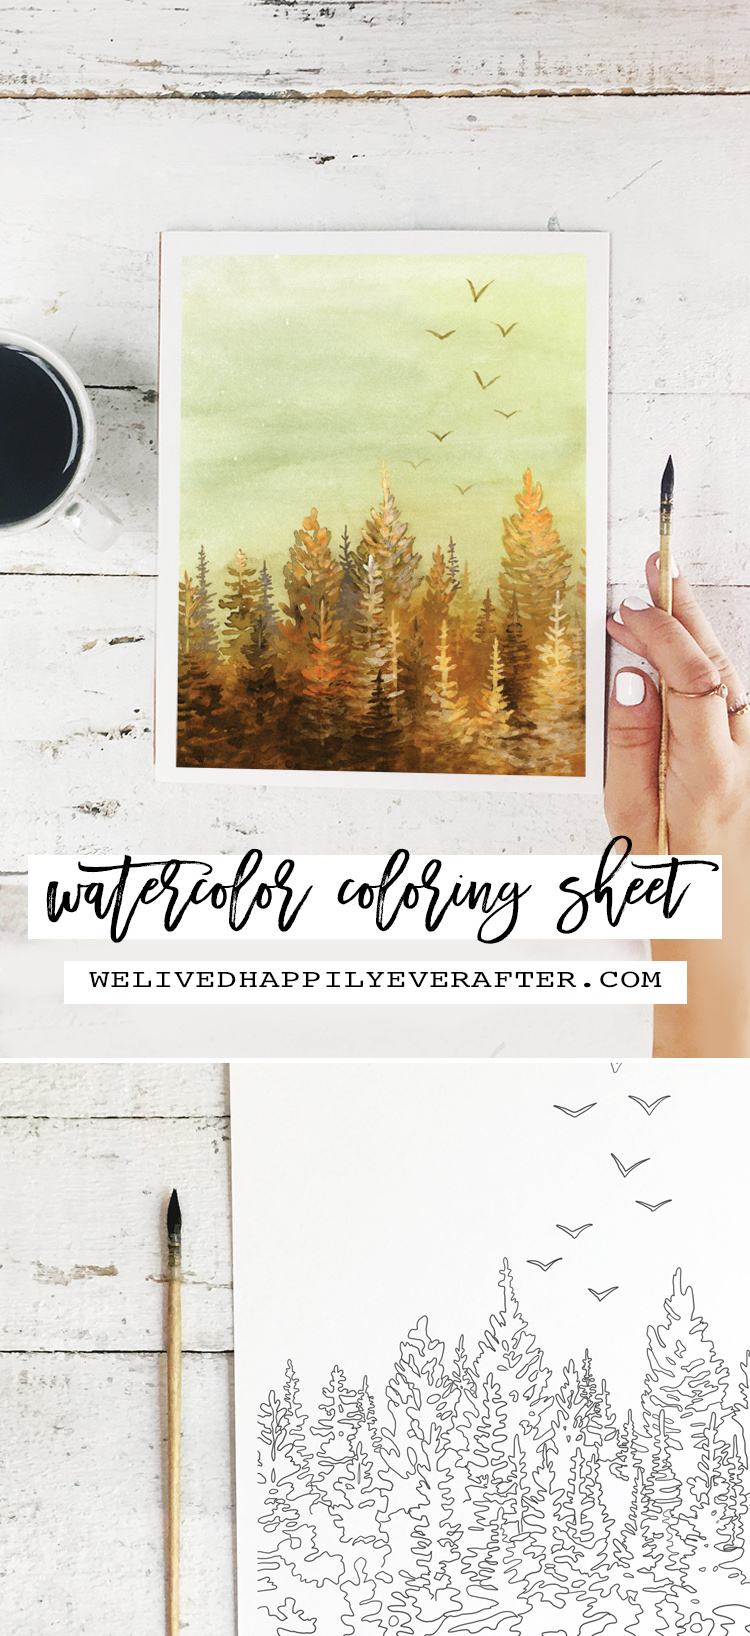 Autumn Sunset Watercolor Painting - Perfect For A DIY Girls Painting Party Night!